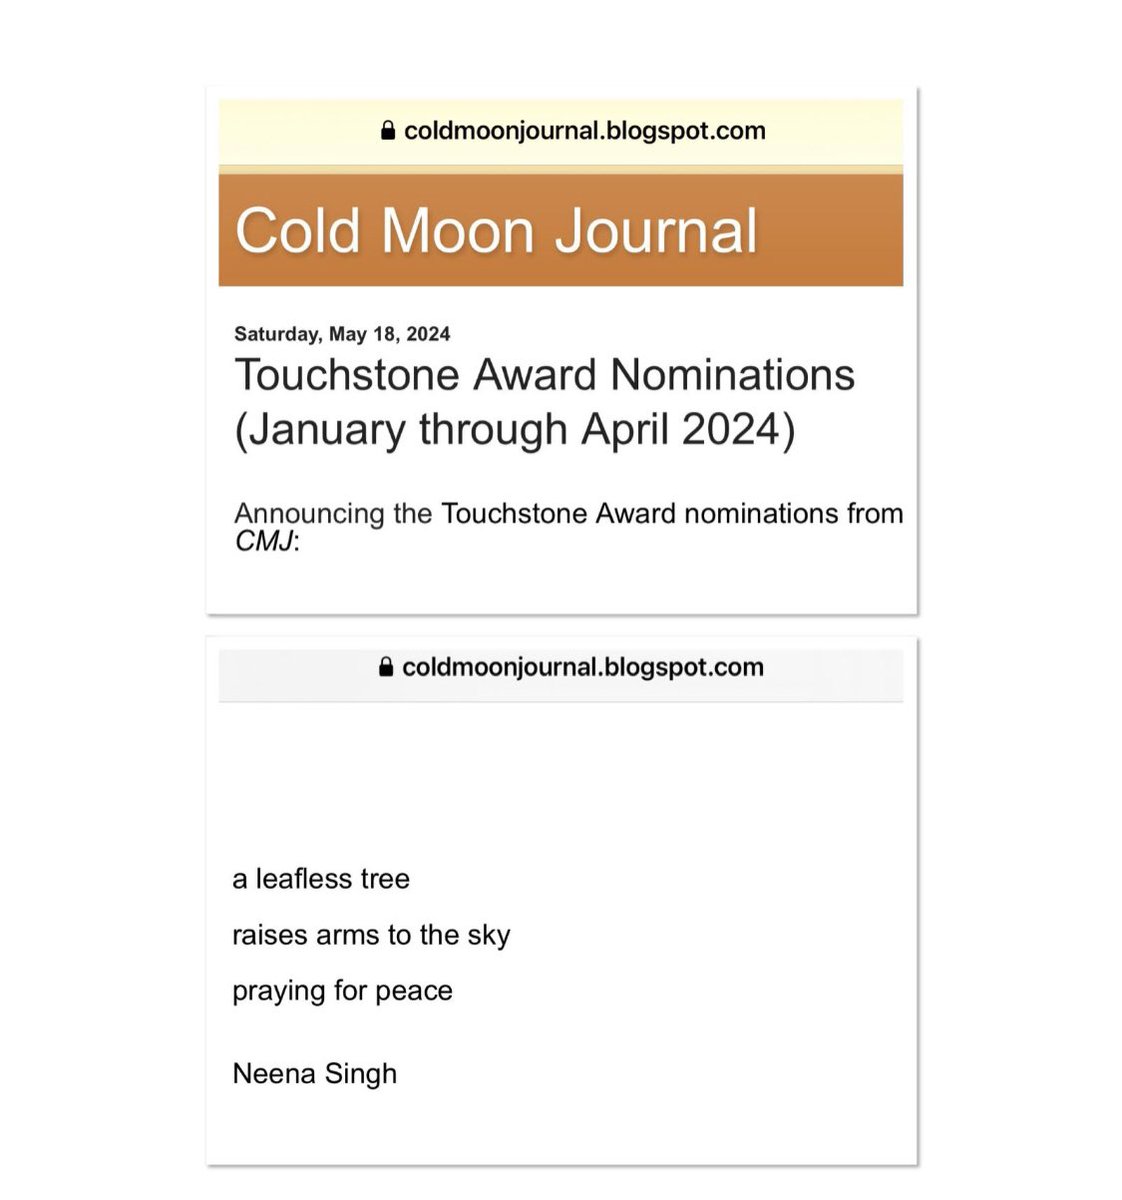 Thanks to dear Robin Jacobson, Editor, #ColdMoon Journal, for the publication of my haiku on 18th May and it’s nomination for the Touchstone Award. 

I am deeply touched and grateful!